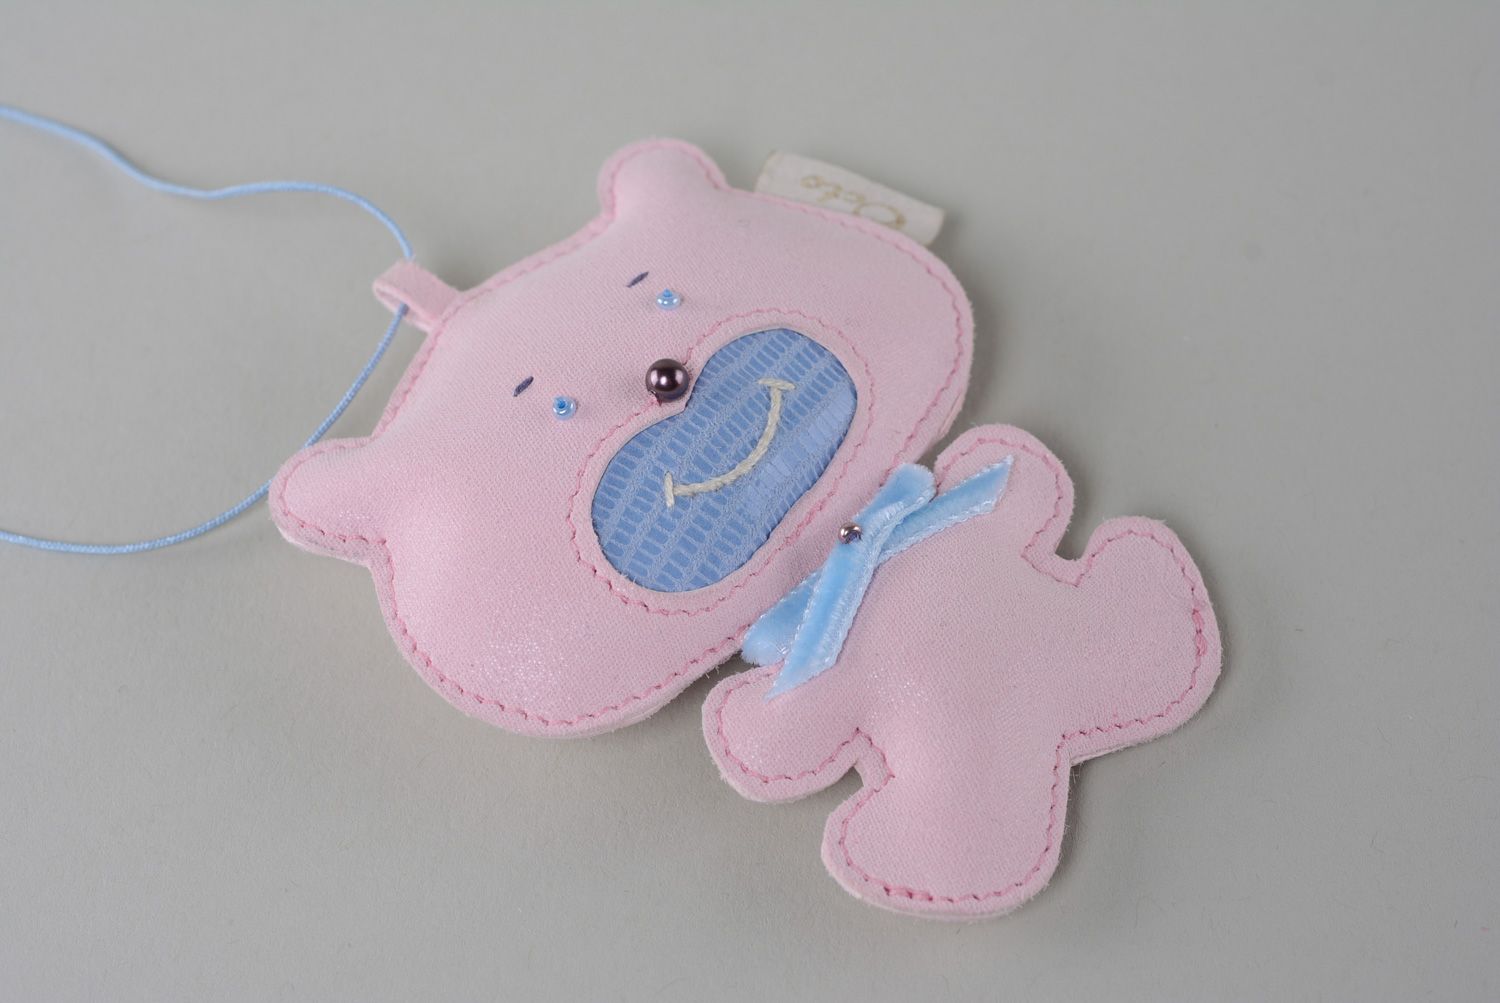 Homemade genuine leather key fob in the shape of cute pink bear charm for bag photo 4